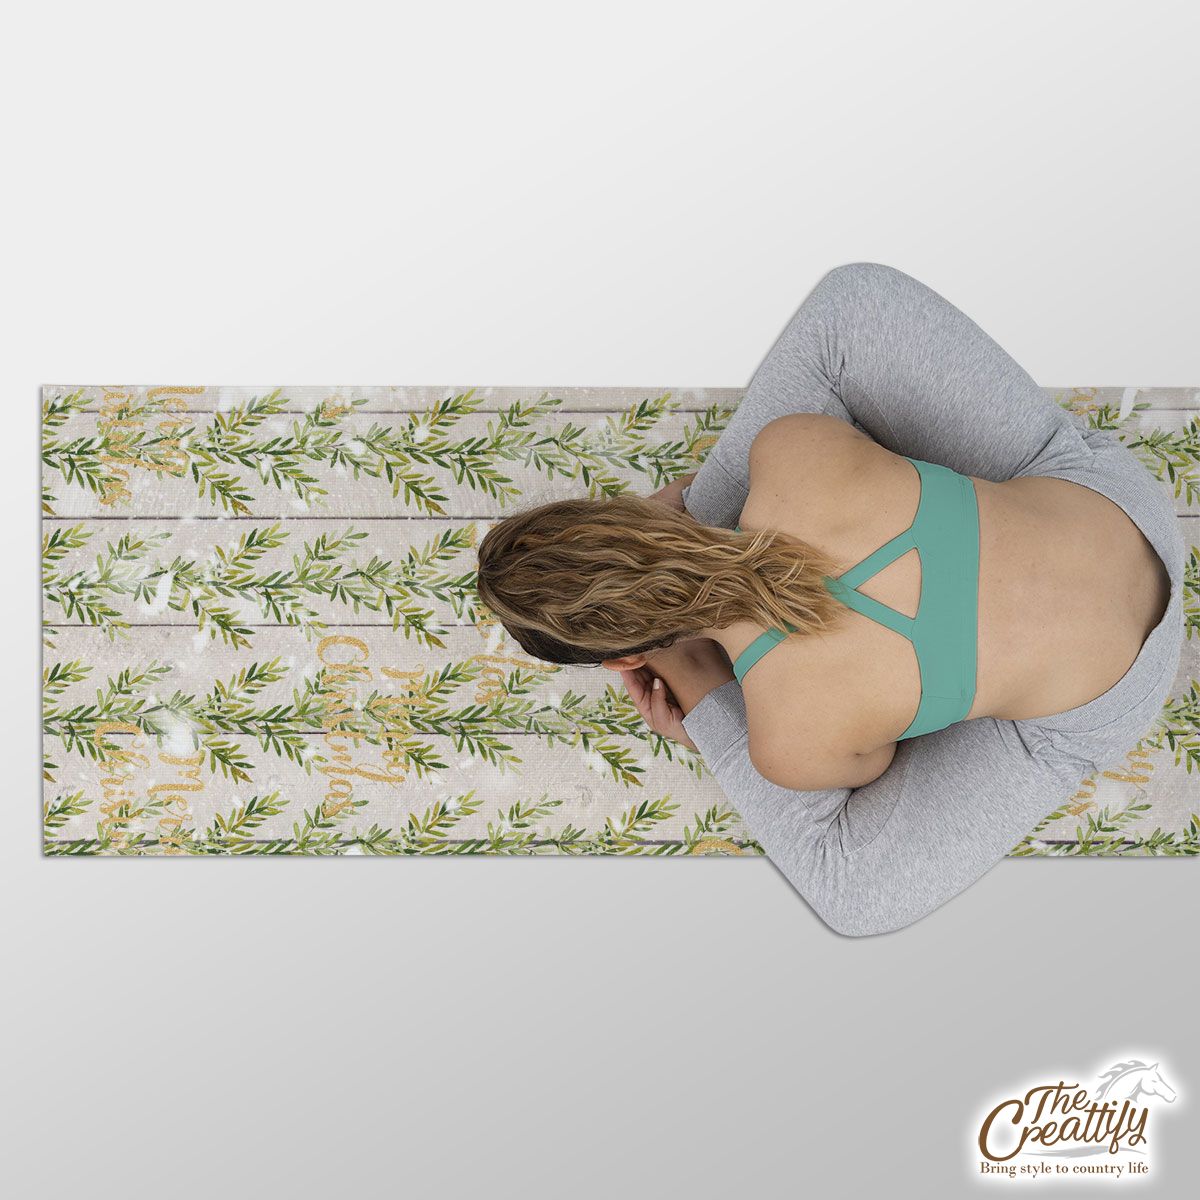 Pine Tree With Merry Christmas Wishes Yoga Mat